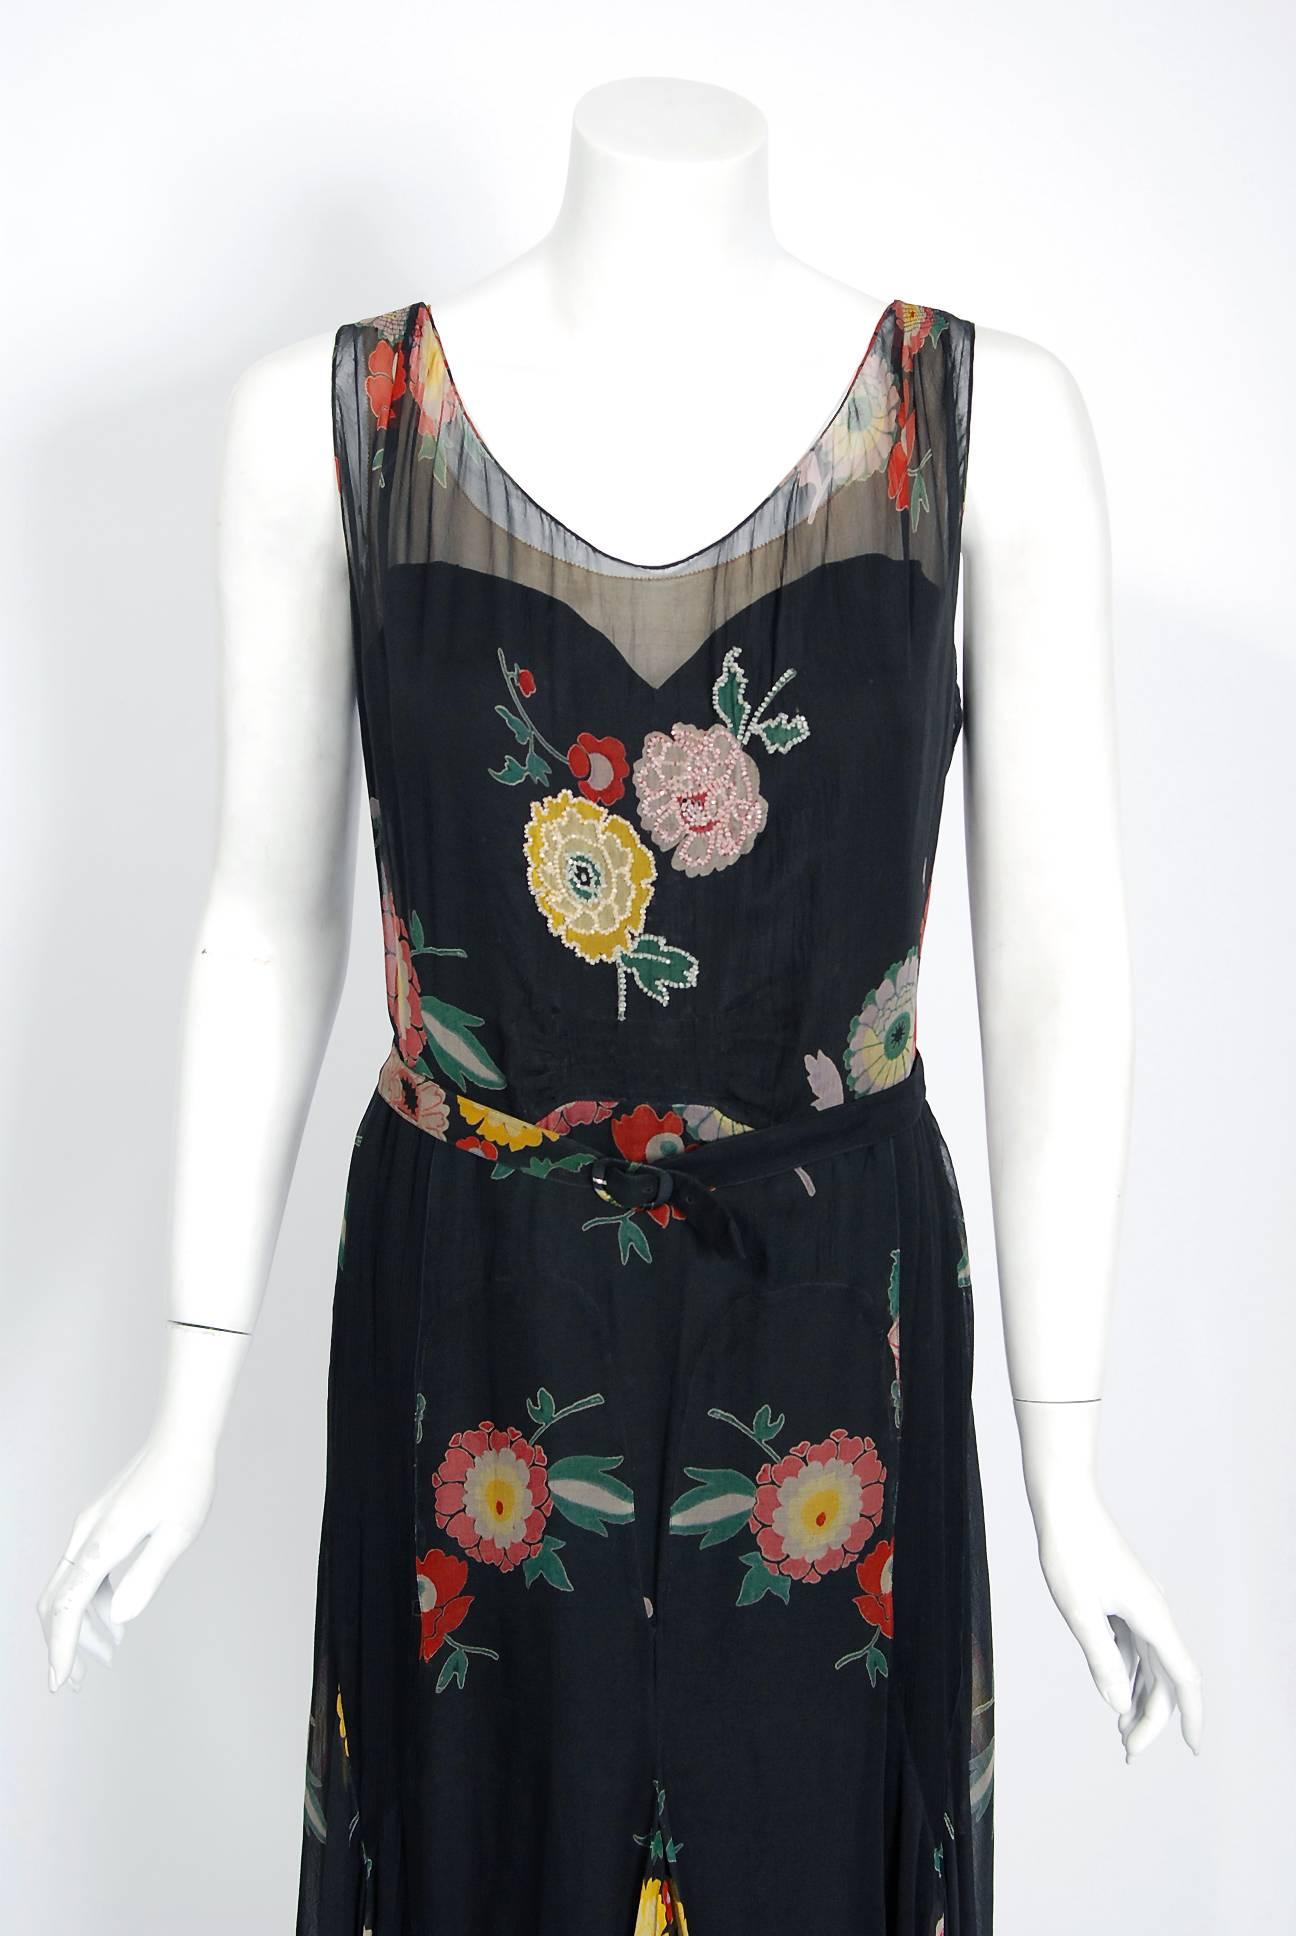 Women's 1930's Beaded Colorful Floral Print Illusion Silk-Chiffon Belted Dress & Jacket